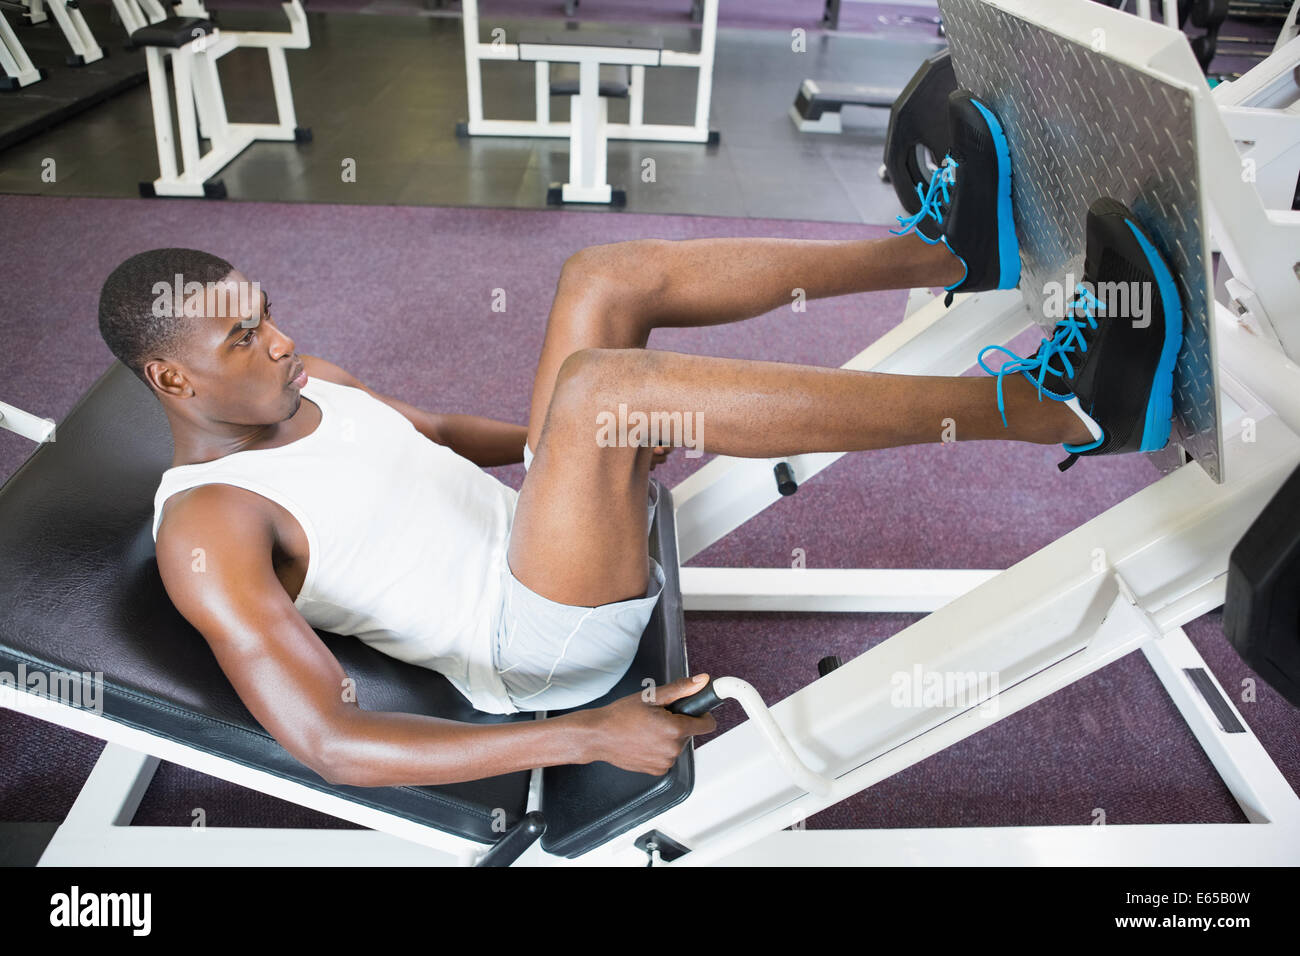 Male weightlifter doing leg presses in gym Stock Photo